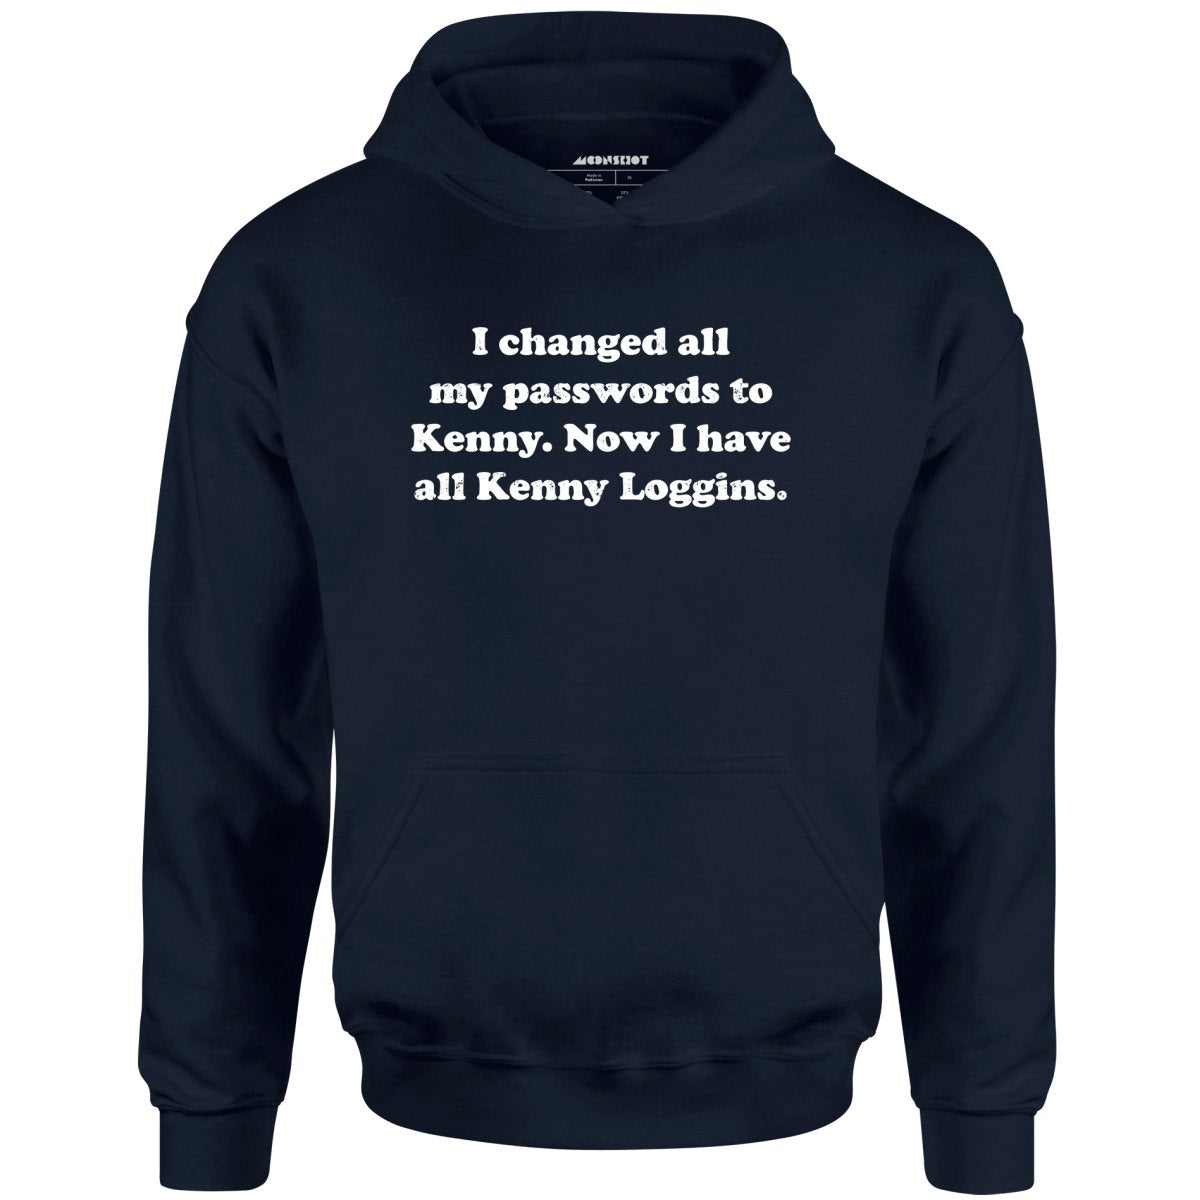 Now I Have All Kenny Loggins - Unisex Hoodie